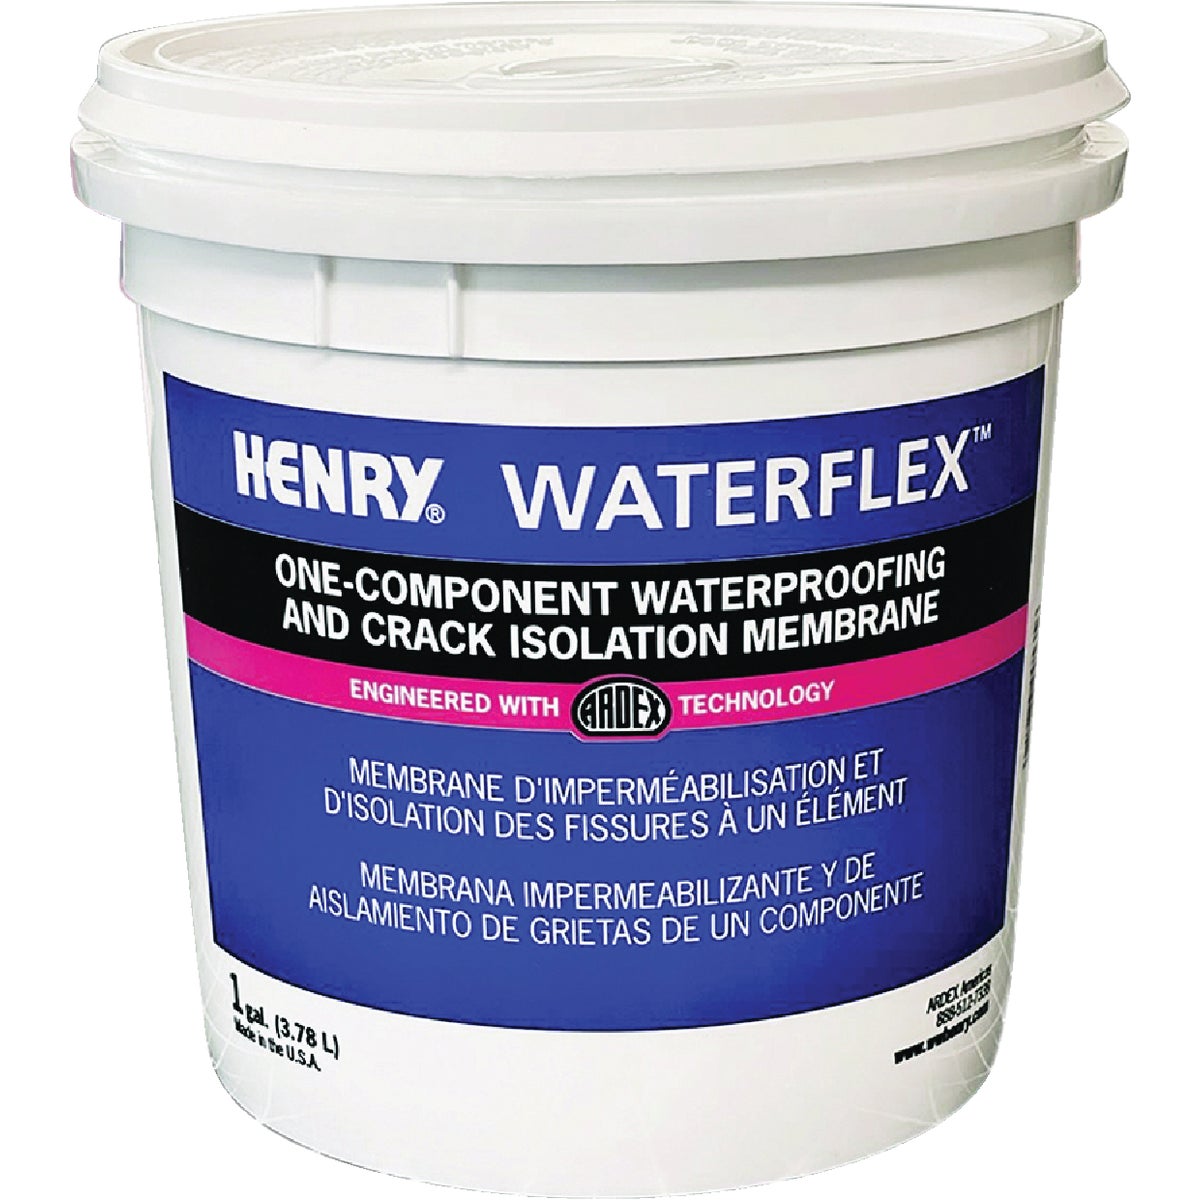 Henry WATERFLEX One-Component Waterproofing and Crack Isolation Membrane, 1 Gal.